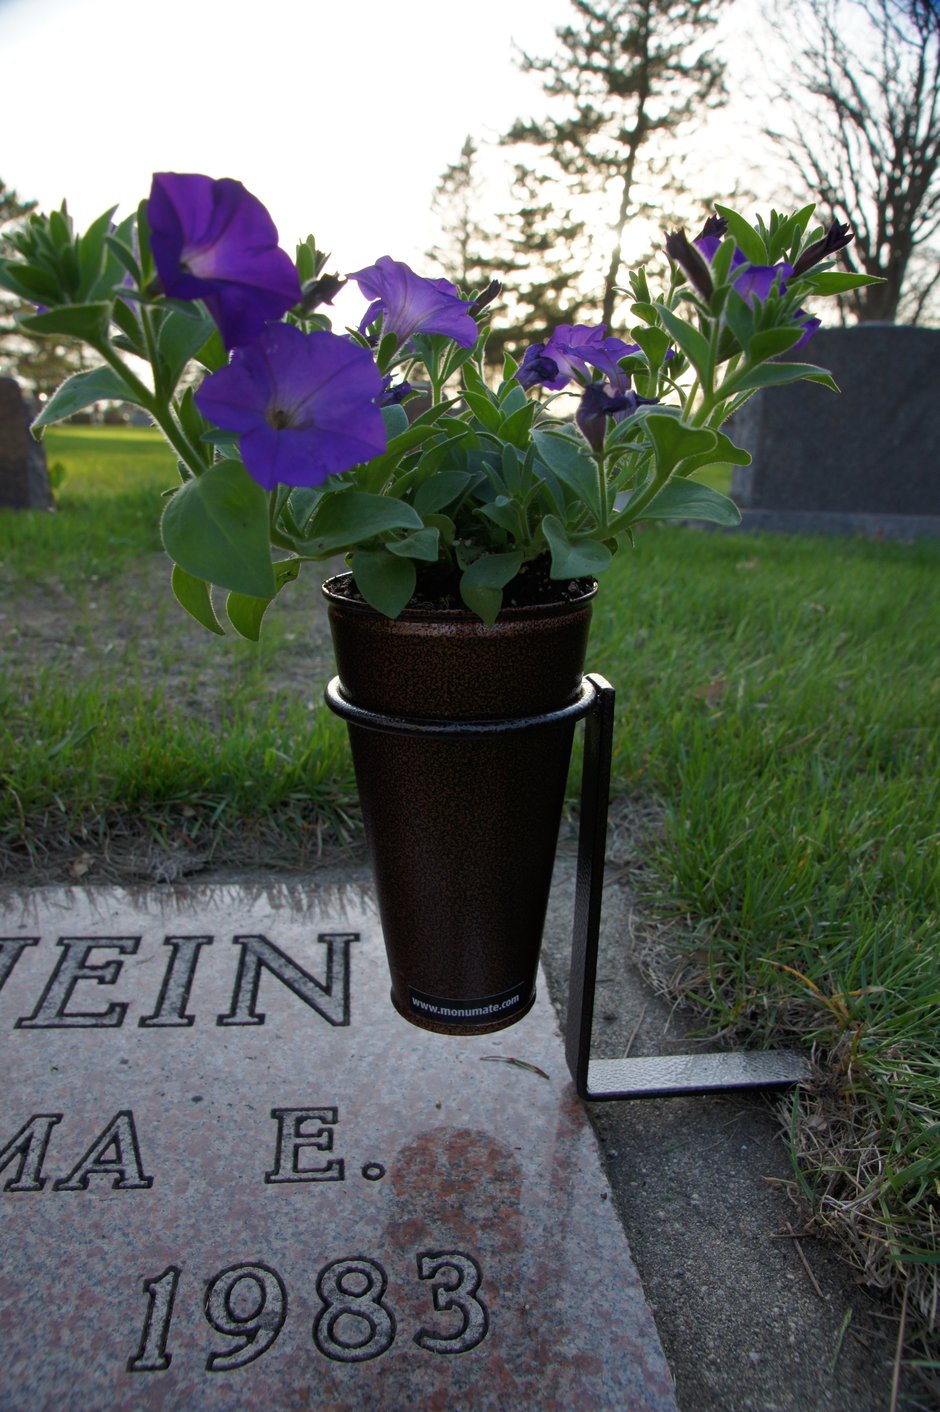 A loving memorial to those you love.
Monumate Memorial Flower Holders are a beautiful addition to your loved one’s memorial. The attractive antique copper or silver holder will enhance the beauty of any type of gravestone.